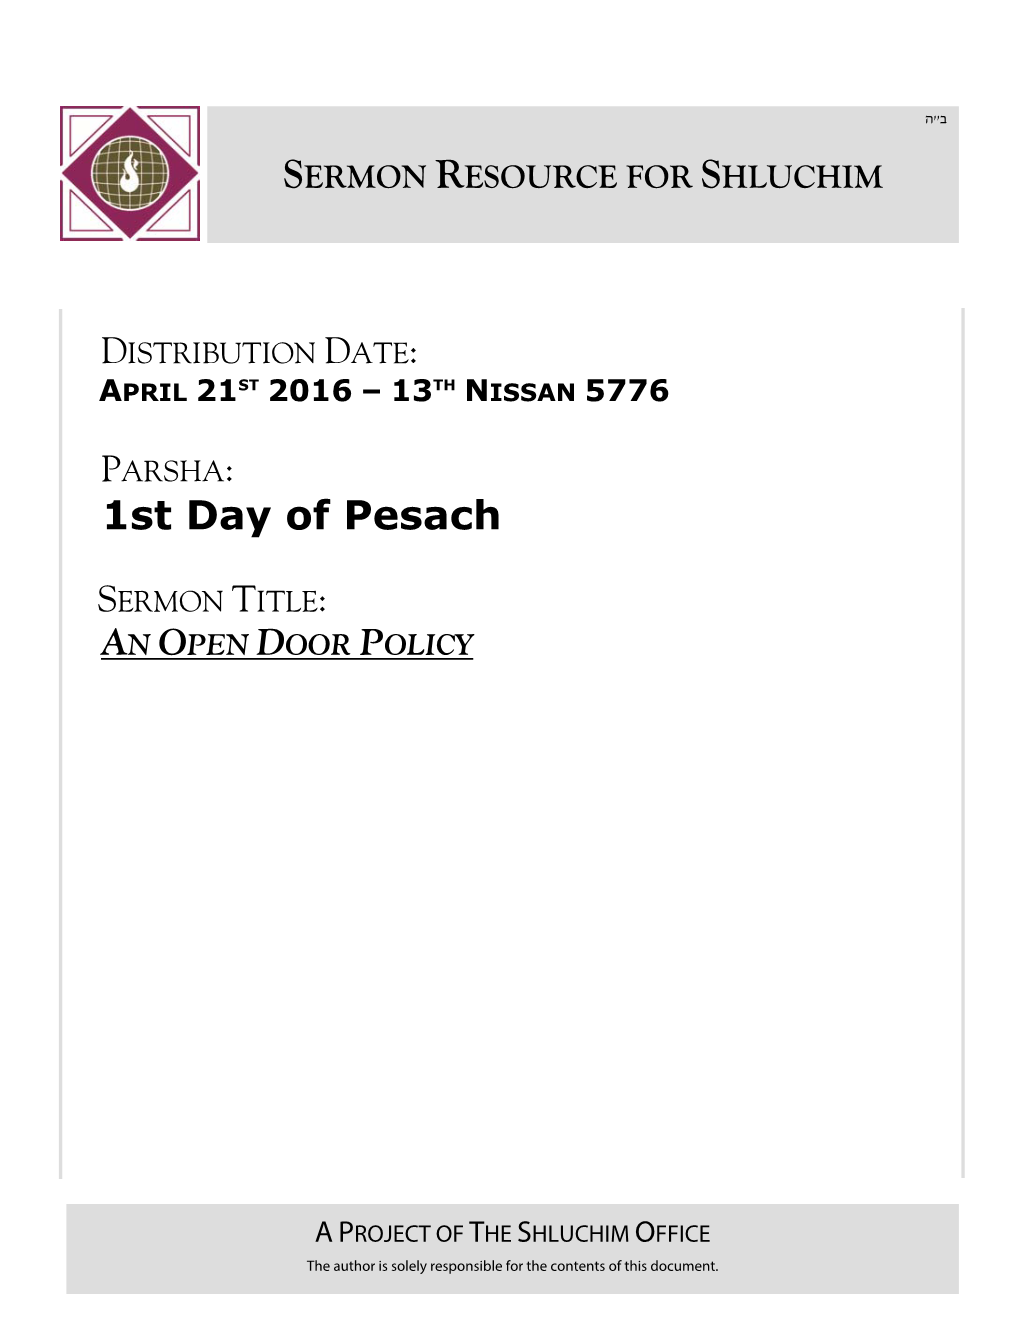 1St Day of Pesach